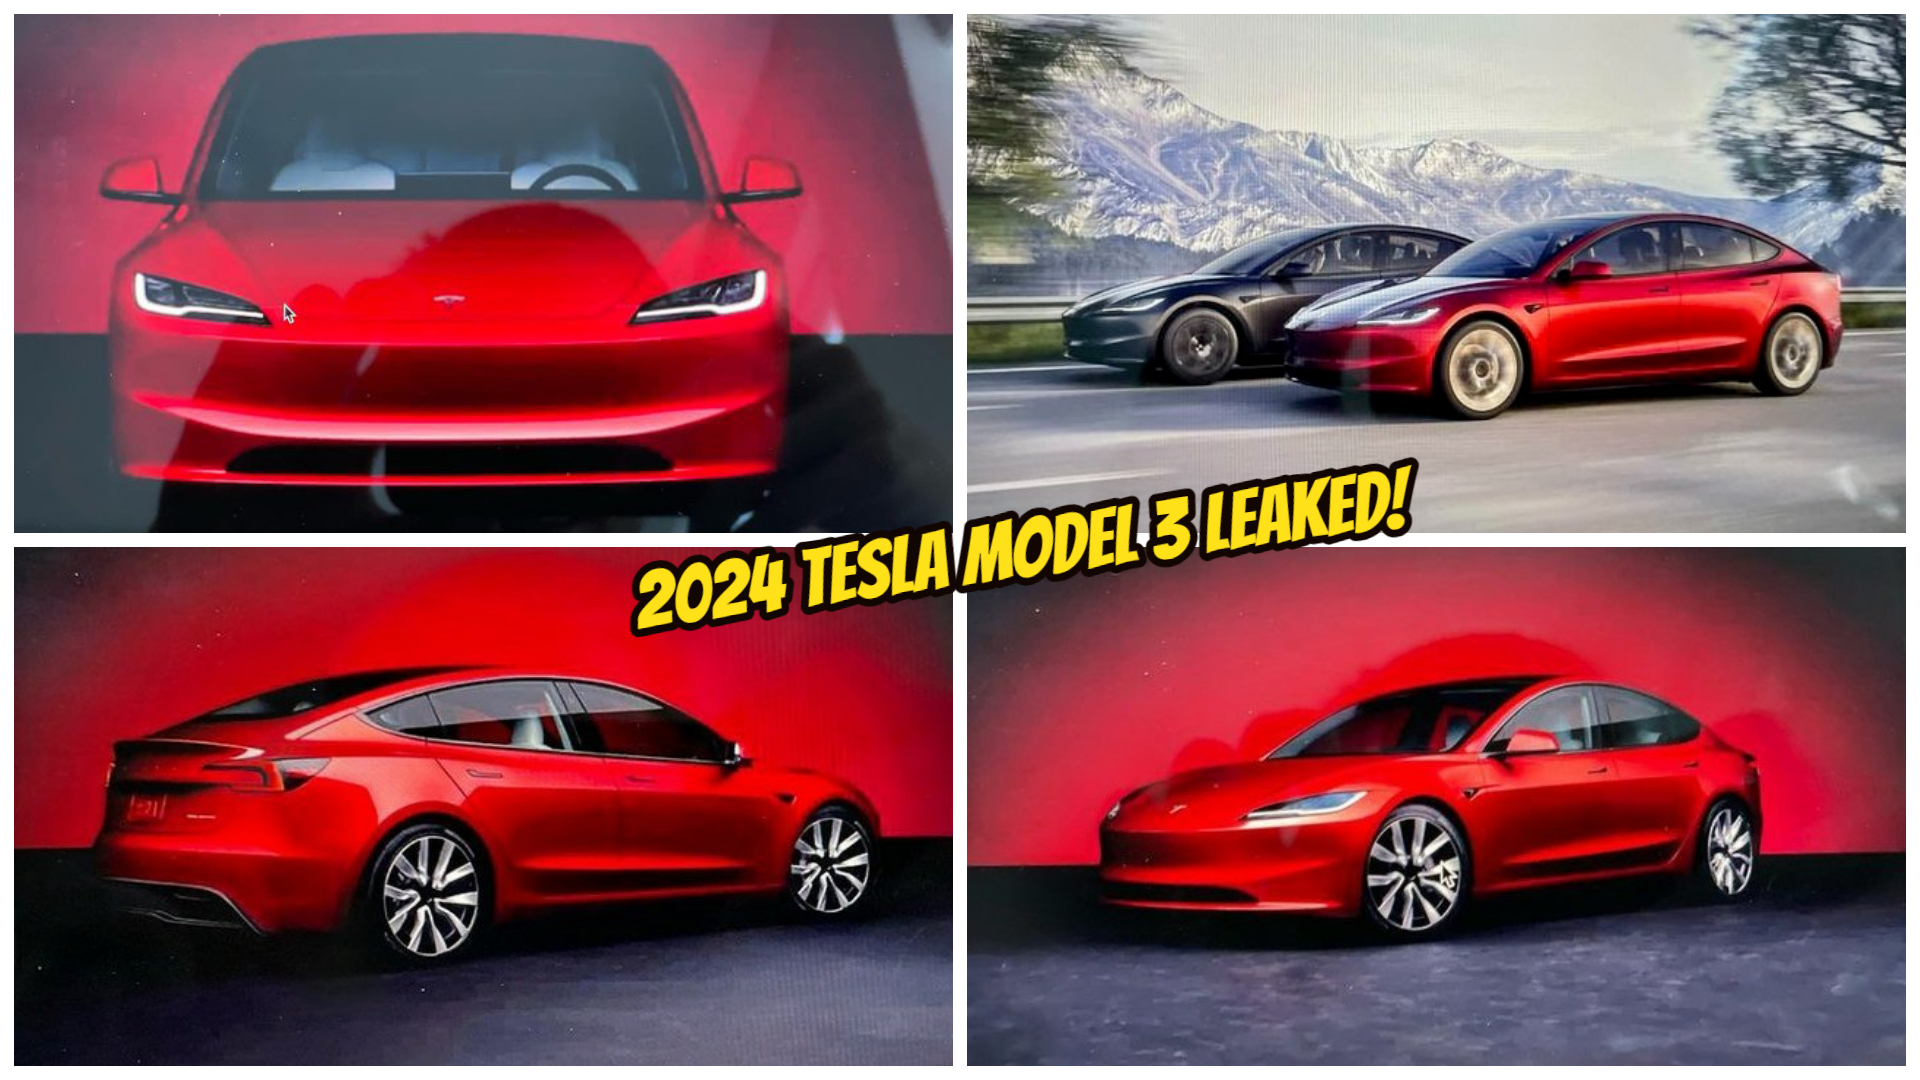 Leaked Photos Show the 2024 Tesla Model 3 Hours Before the Alleged Official Introduction